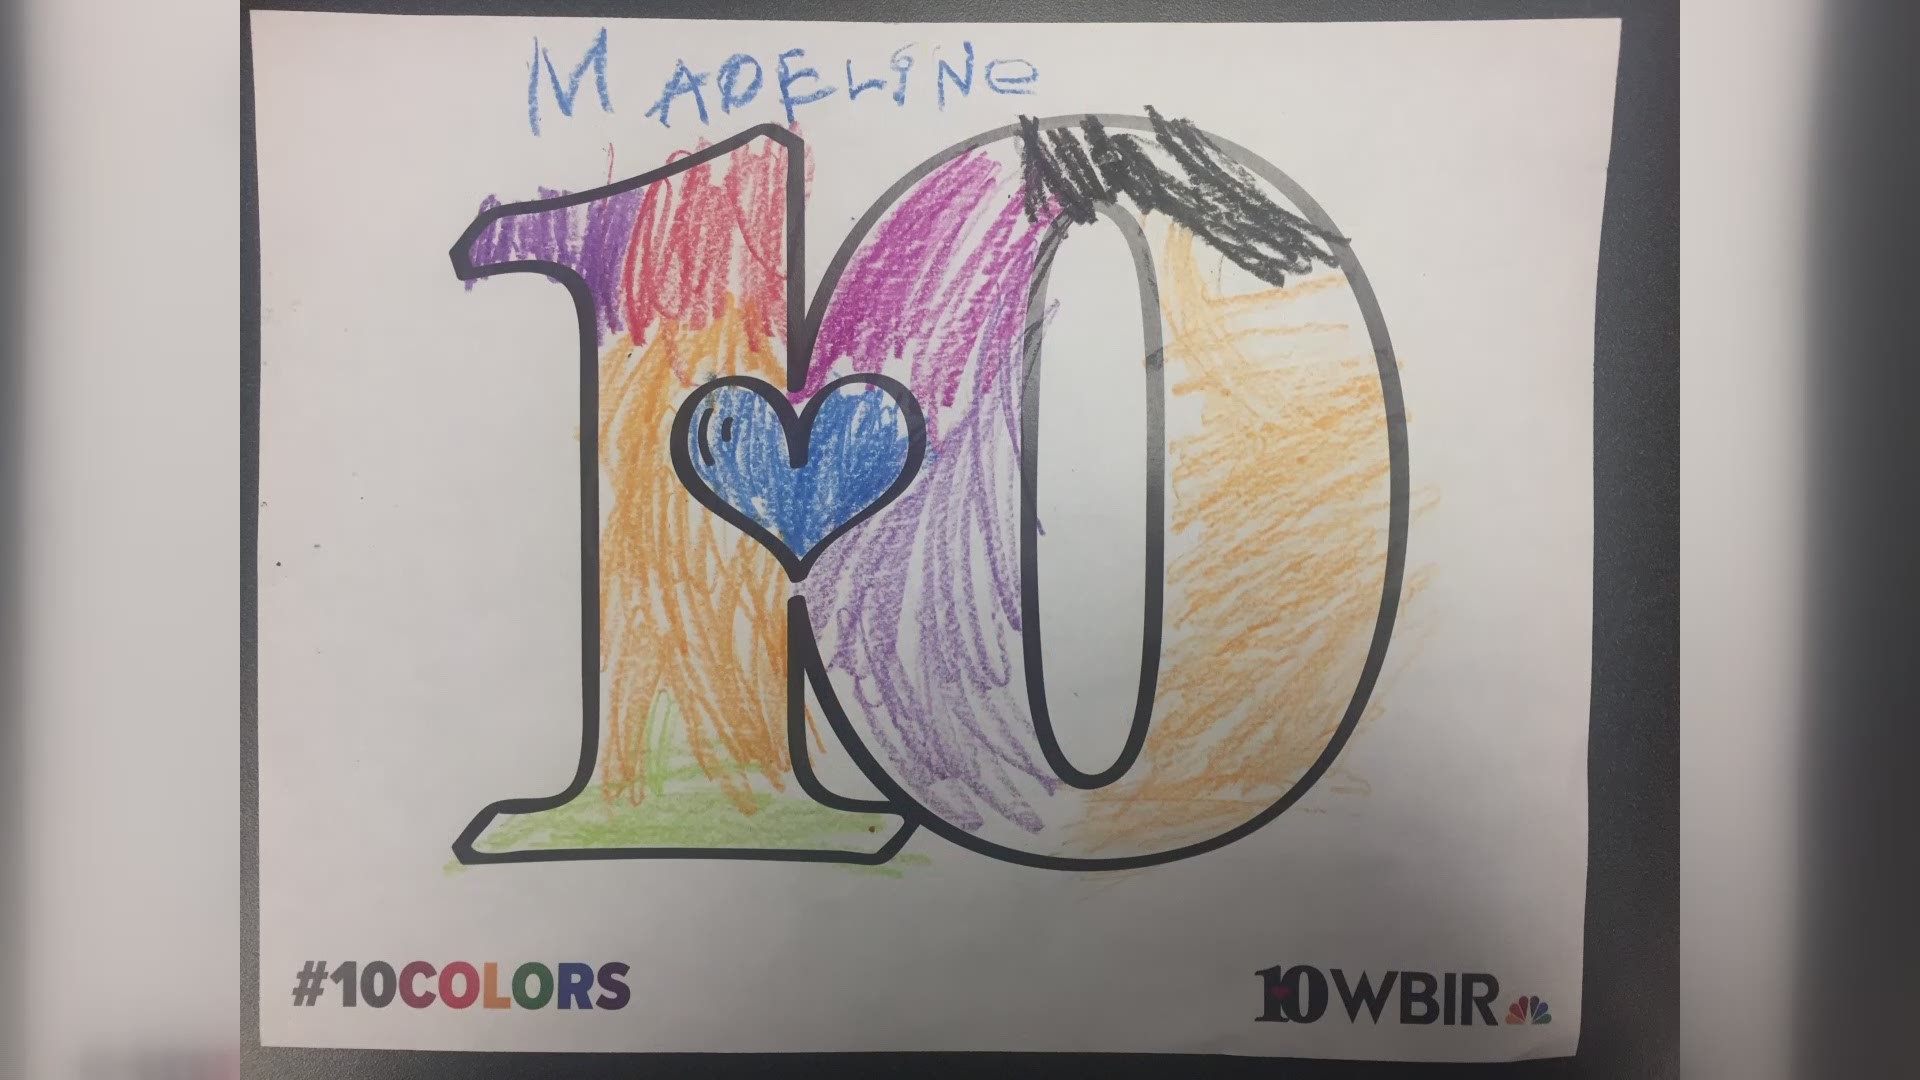 Kids were able to color in pictures for the Children's Festival of Reading.